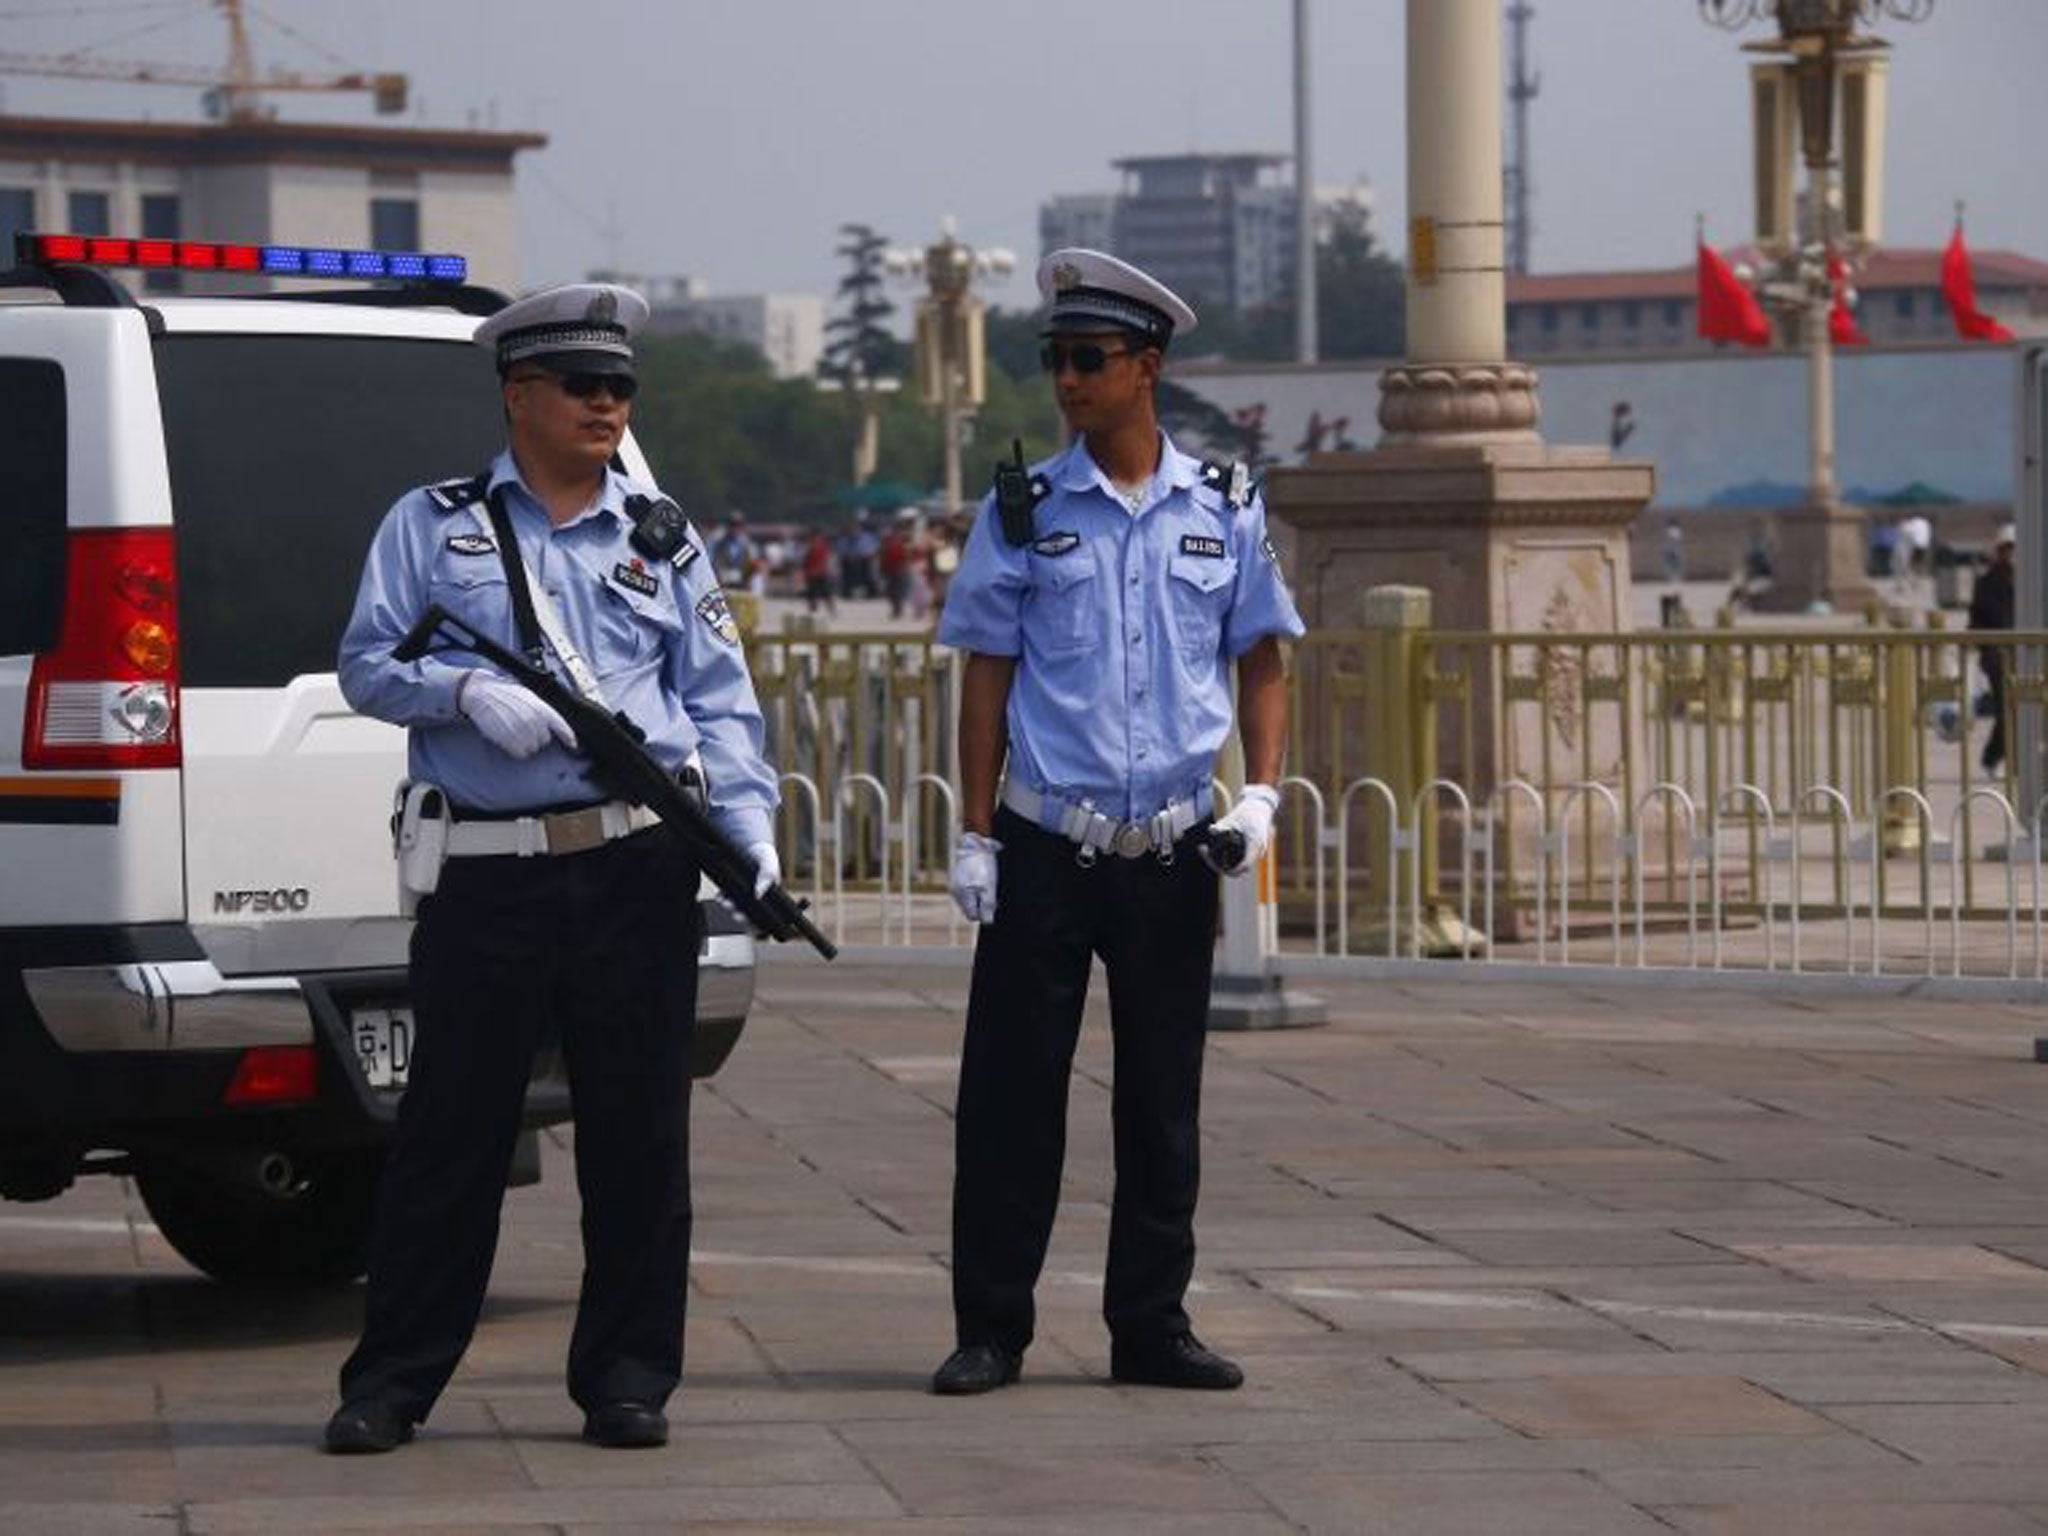 Armed police stand guard at Tiananmen Square in Beijing